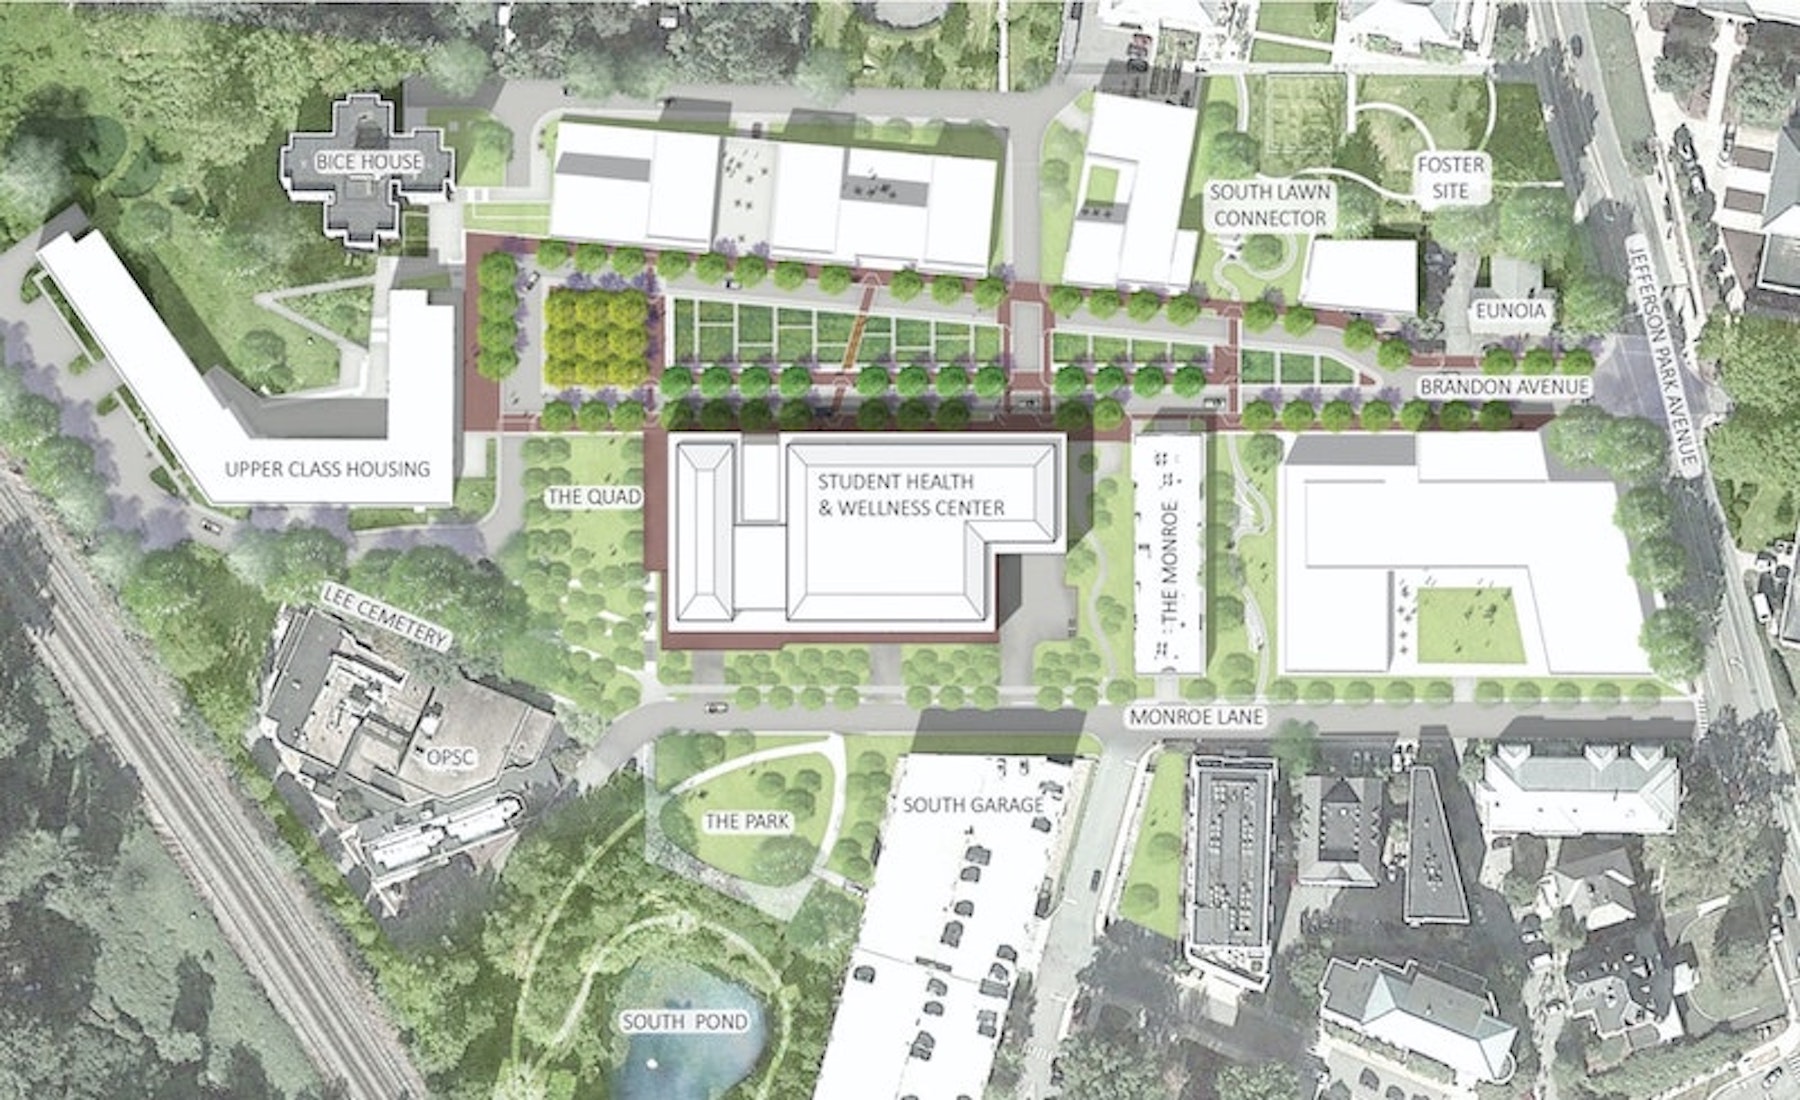 The Center is part of a campus master plan